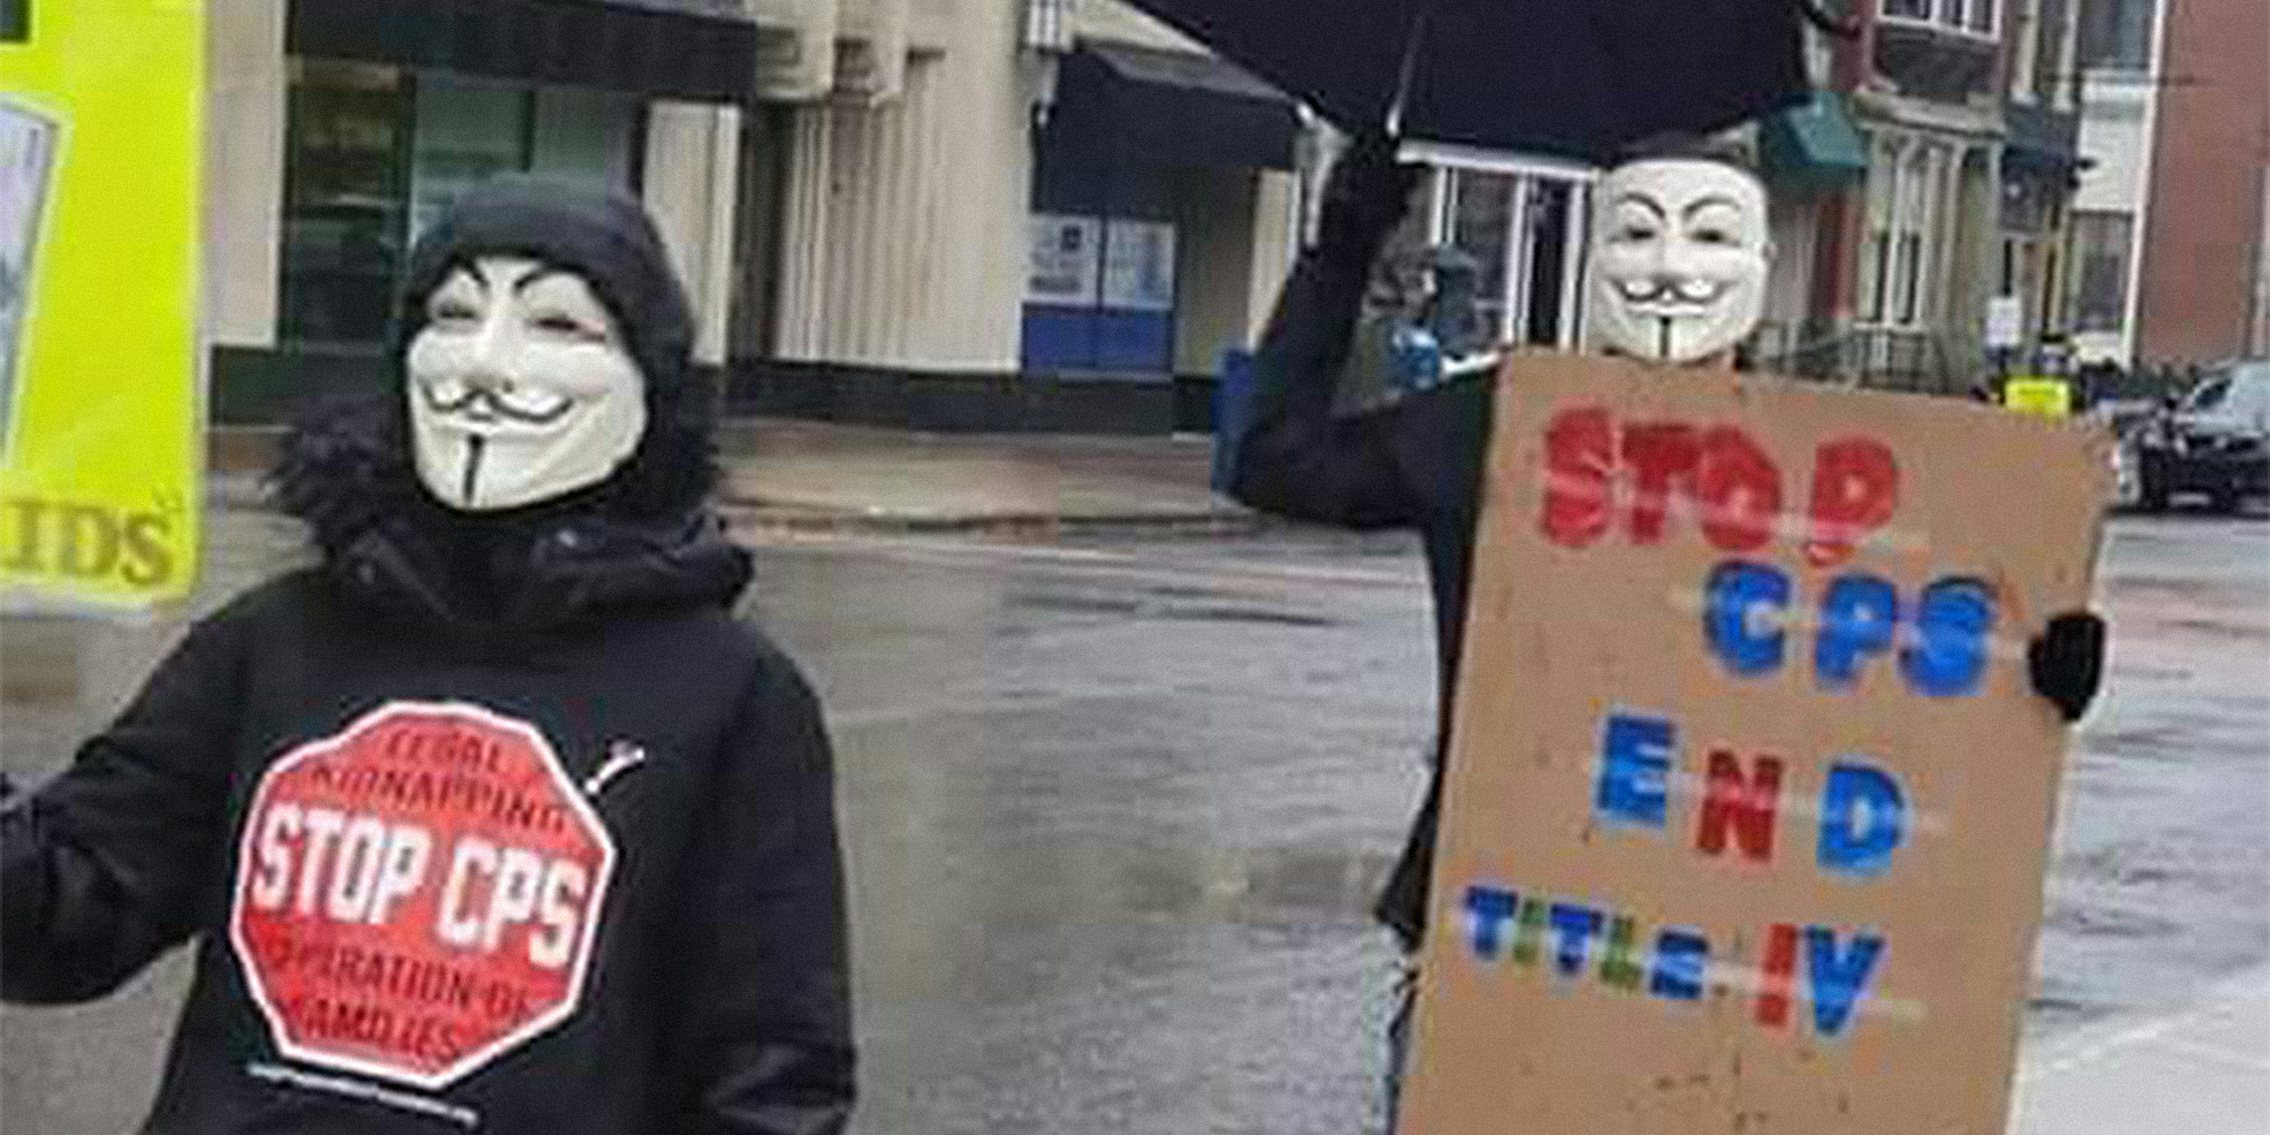 people wearing guy fawkes masks carrying 'stop cps' signs